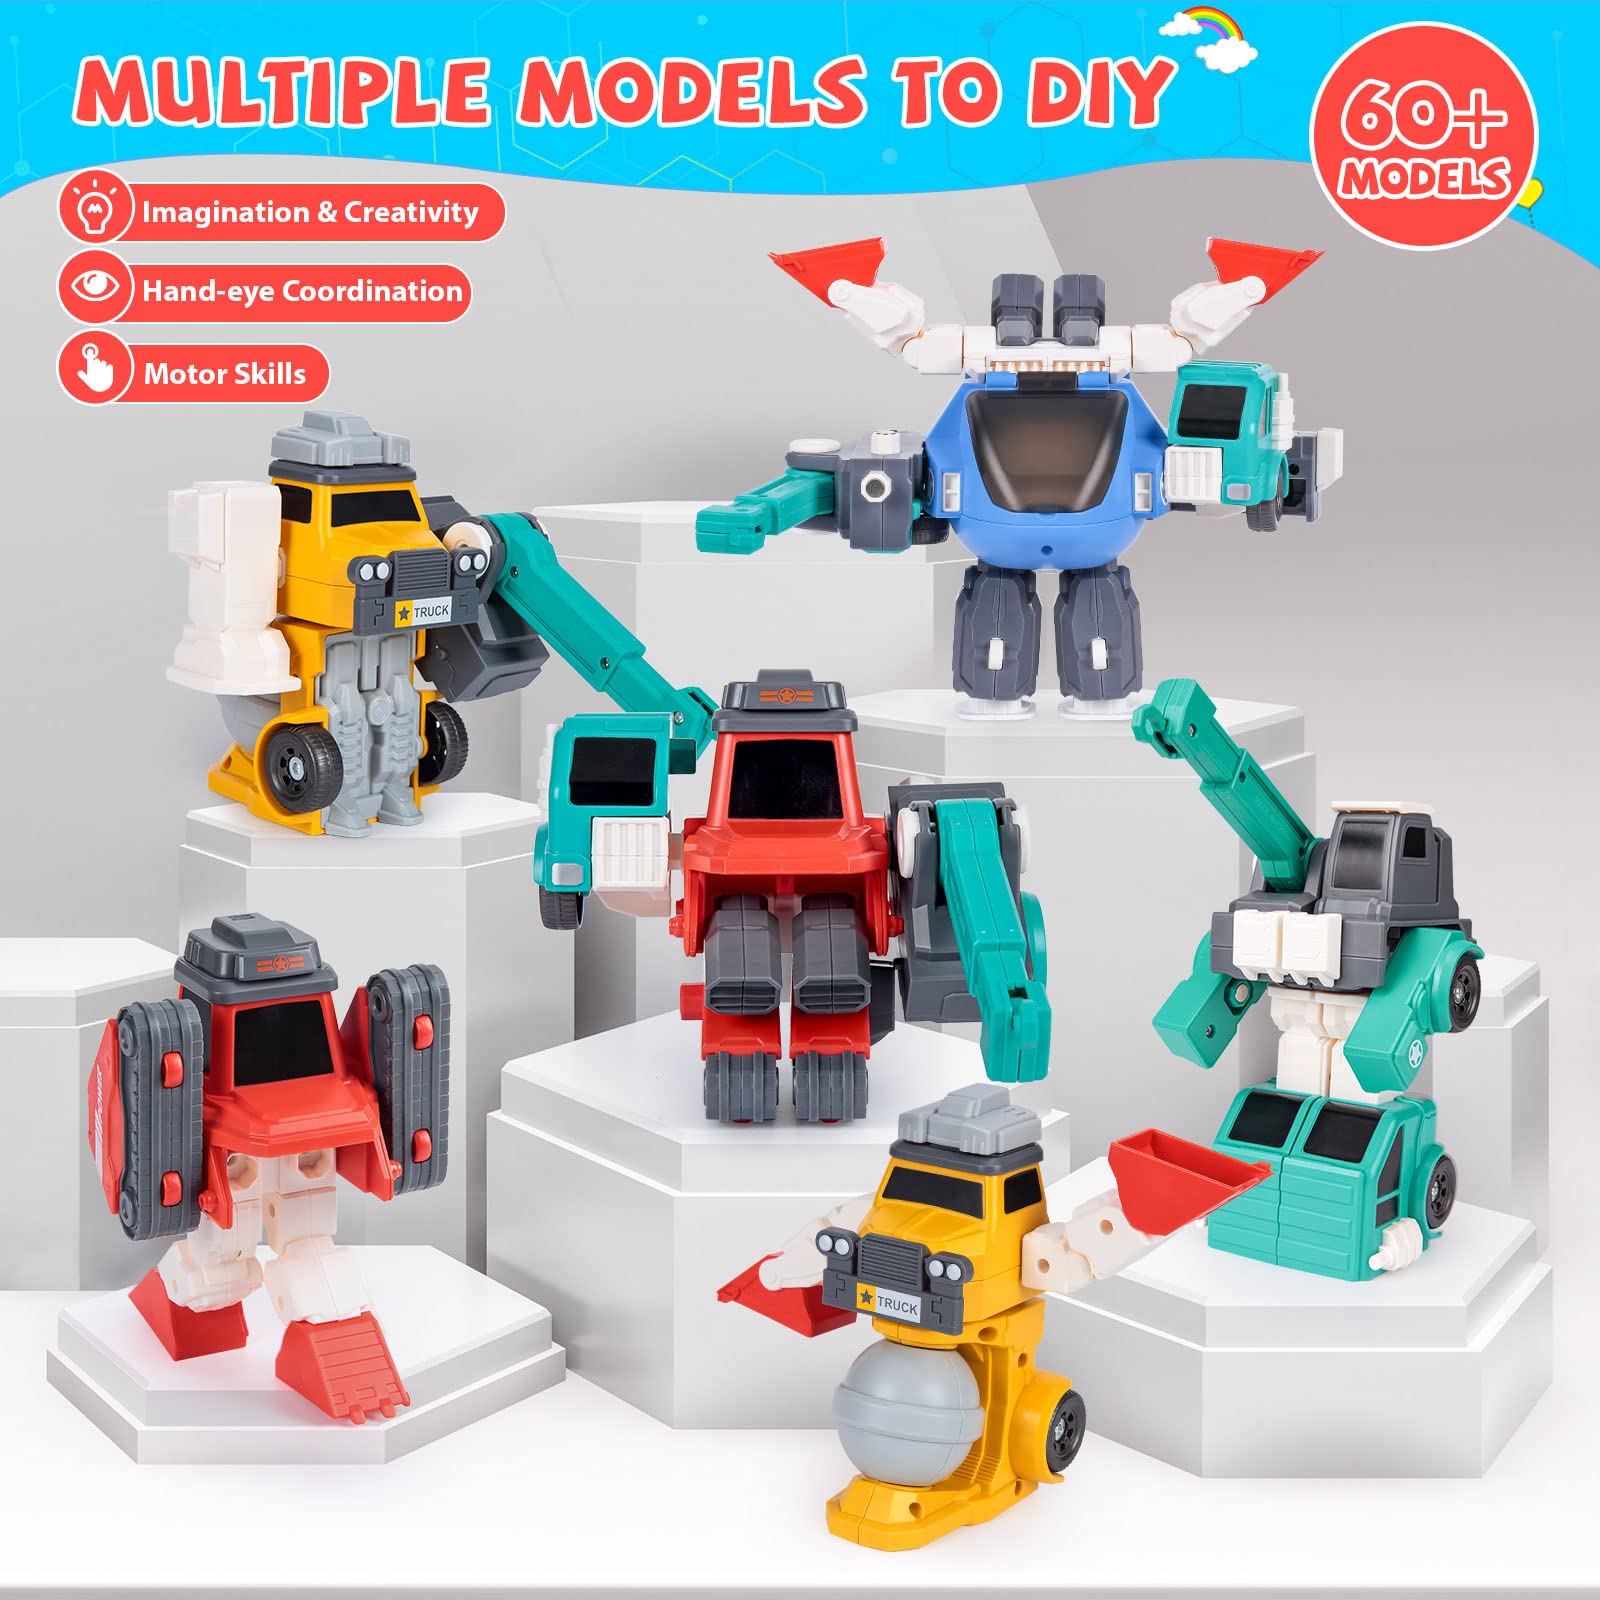 Perbyste Toys for 3 4 5 6 7 8 Year Old, Transform Robot Kids Toy Vehicles | STEM Building Toys for Ages 3-6, 4 in 1 Construction Trucks Christmas Birthday Gifts for Boy Girls